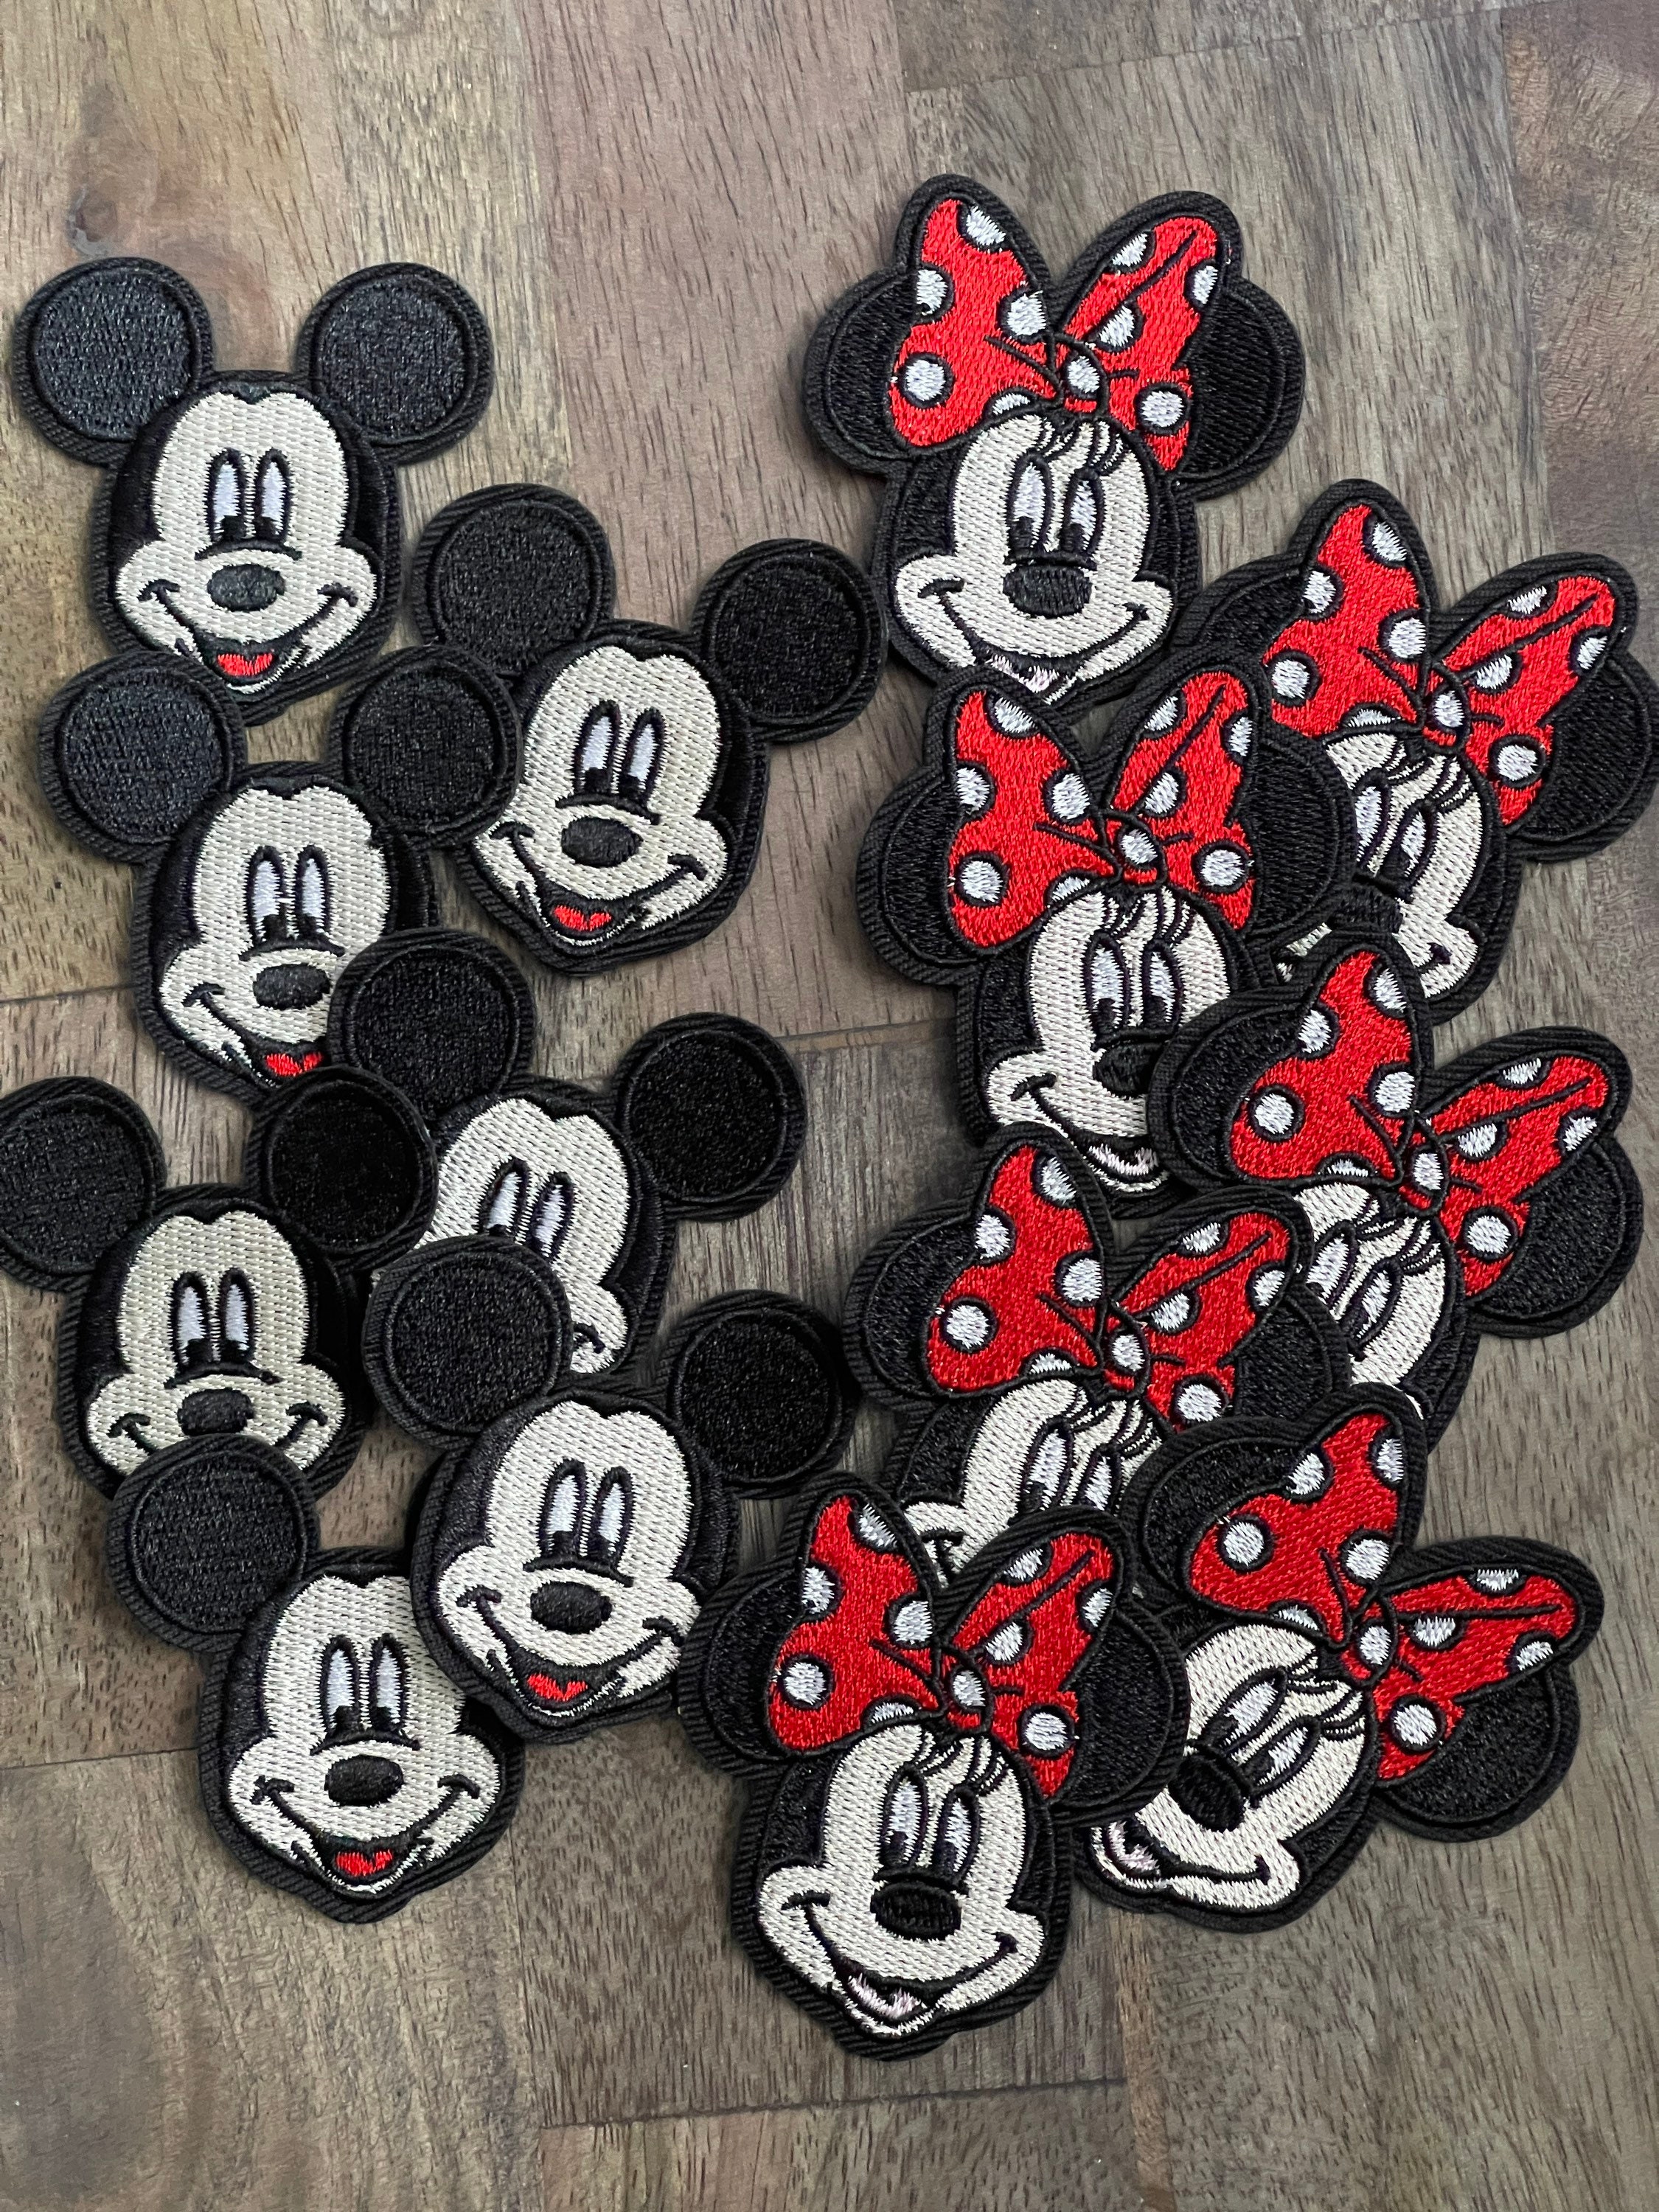  CLOVER INTER 3 Pcs Mickey Patches Iron on Embroidered Badge Saw  On Patch for Jeans, Clothing, Bags, Jackets, Caps : Arts, Crafts & Sewing